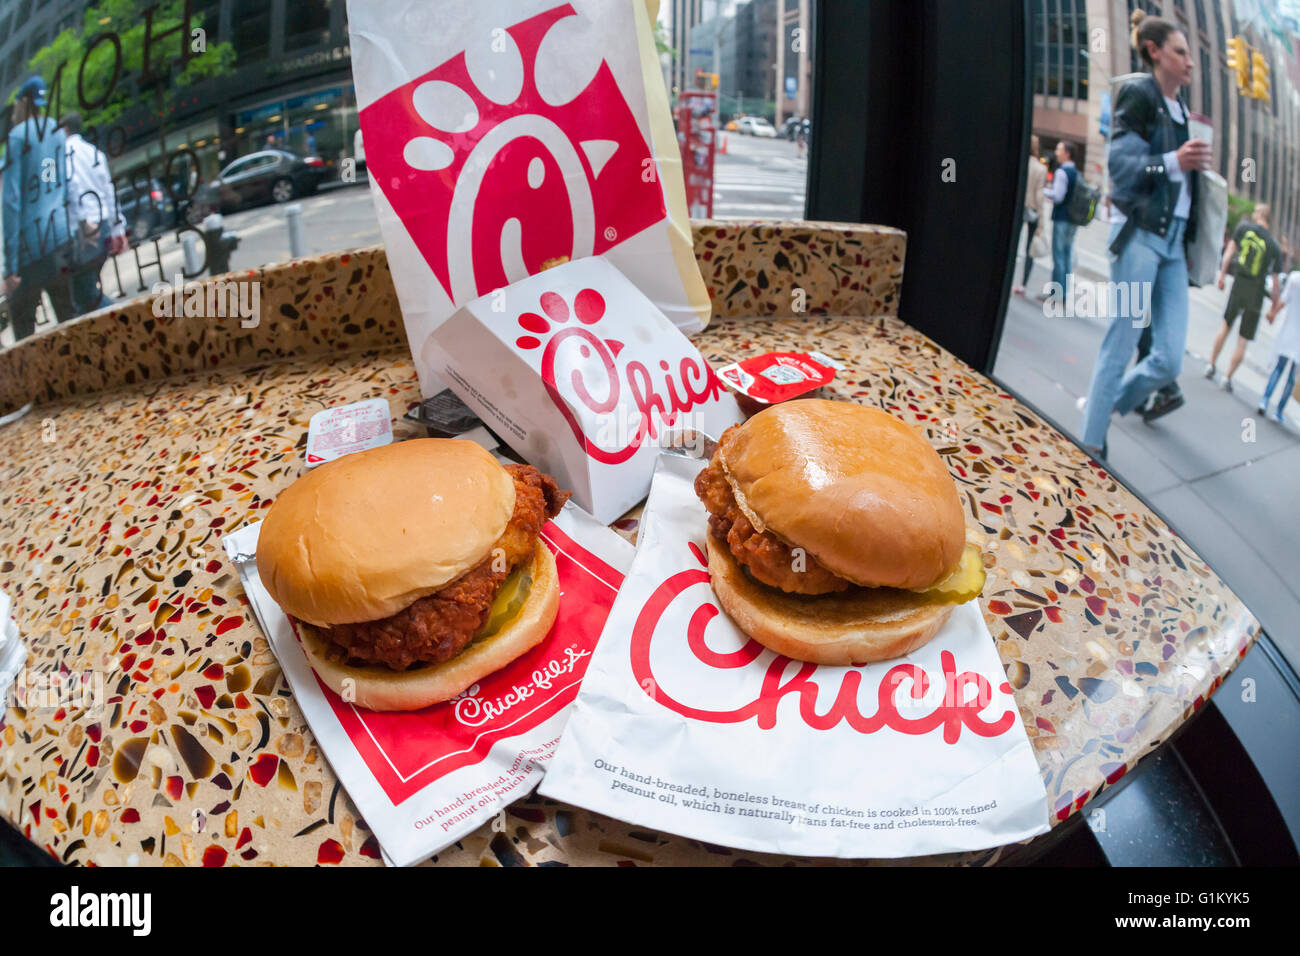 A classic Chick-Fil-A chicken sandwich and a Spicy Chicken sandwich in a Chick-Fil-A restaurant in New York on Saturday, May 14, 2016. New York Mayor Bill de Blasio recently called on New Yorkers to boycott the restaurant chain because of the religious beliefs of its president, Dan Cathy. The chain's popular two Manhattan operations see lines snaking out the door and has plans to open 12 more locations in New York. (© Richard B. Levine) Stock Photo